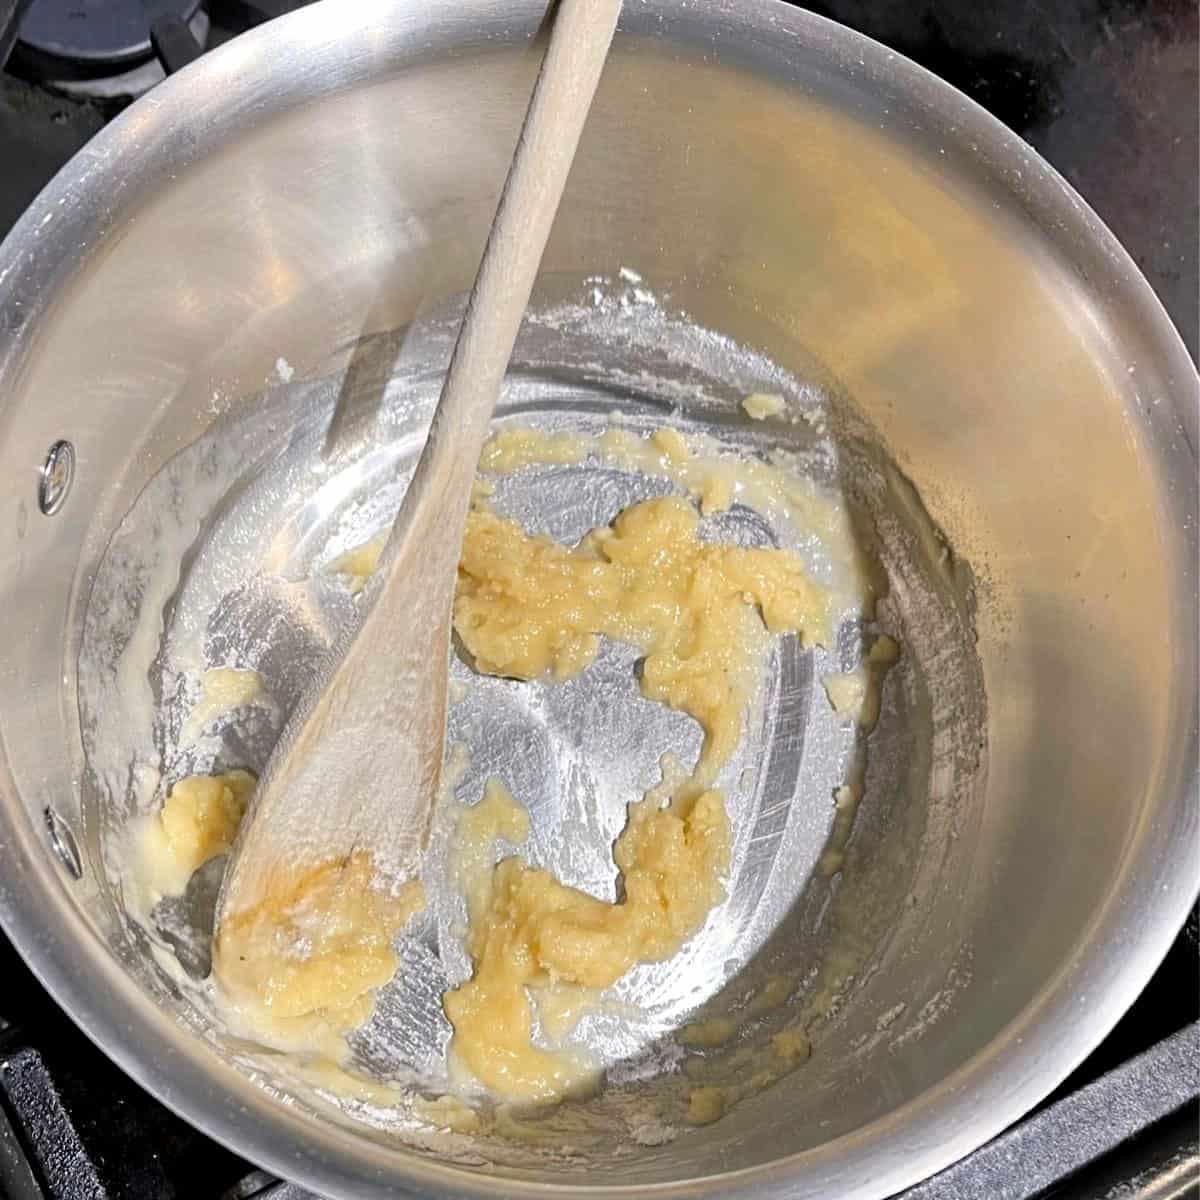 Flour added to butter in saucepan.